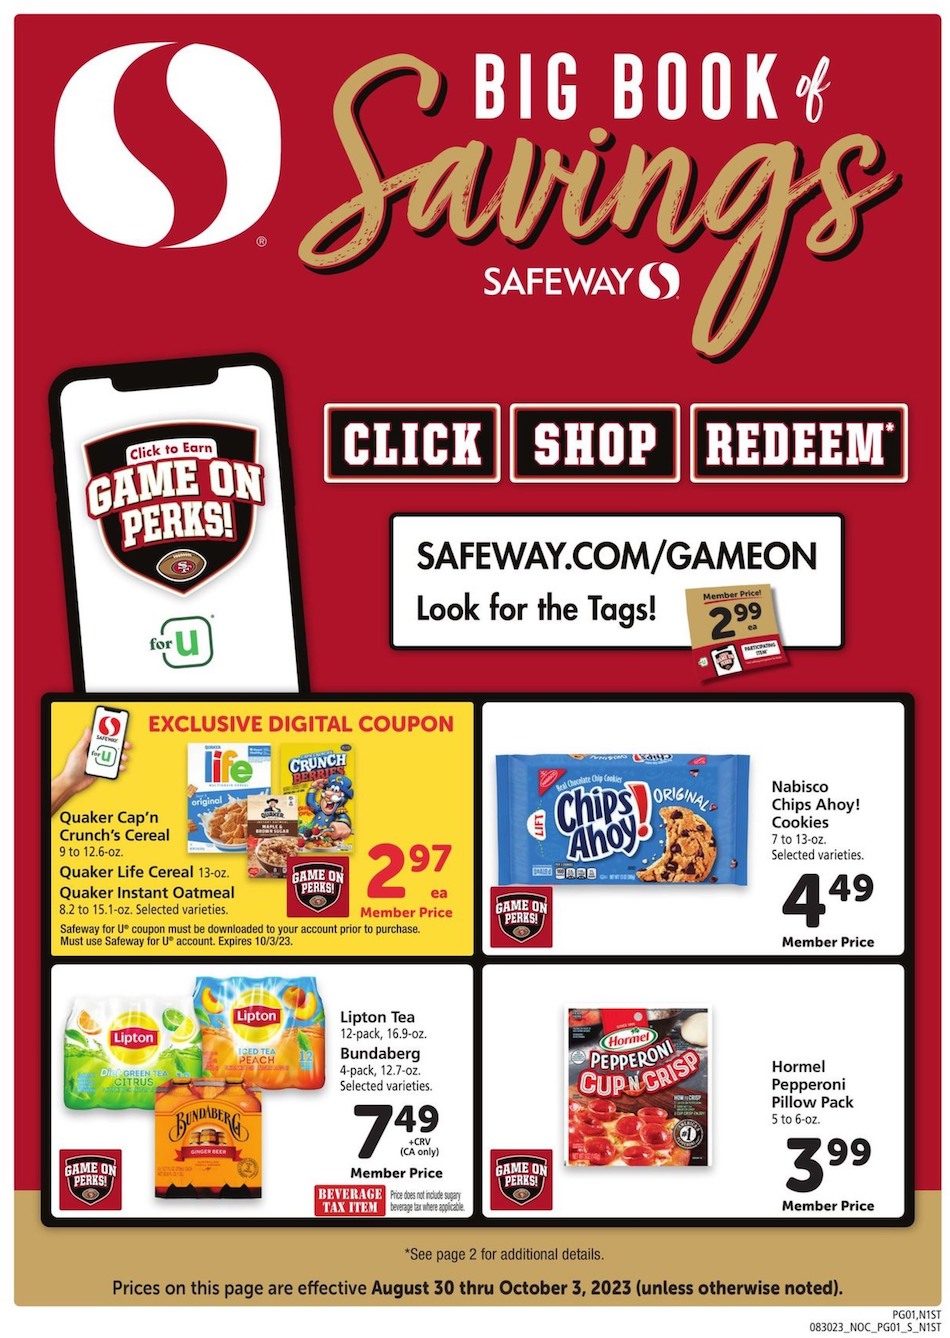 Safeway Ad Big Book Savings 30th September – 3rd October 2023 Page 1